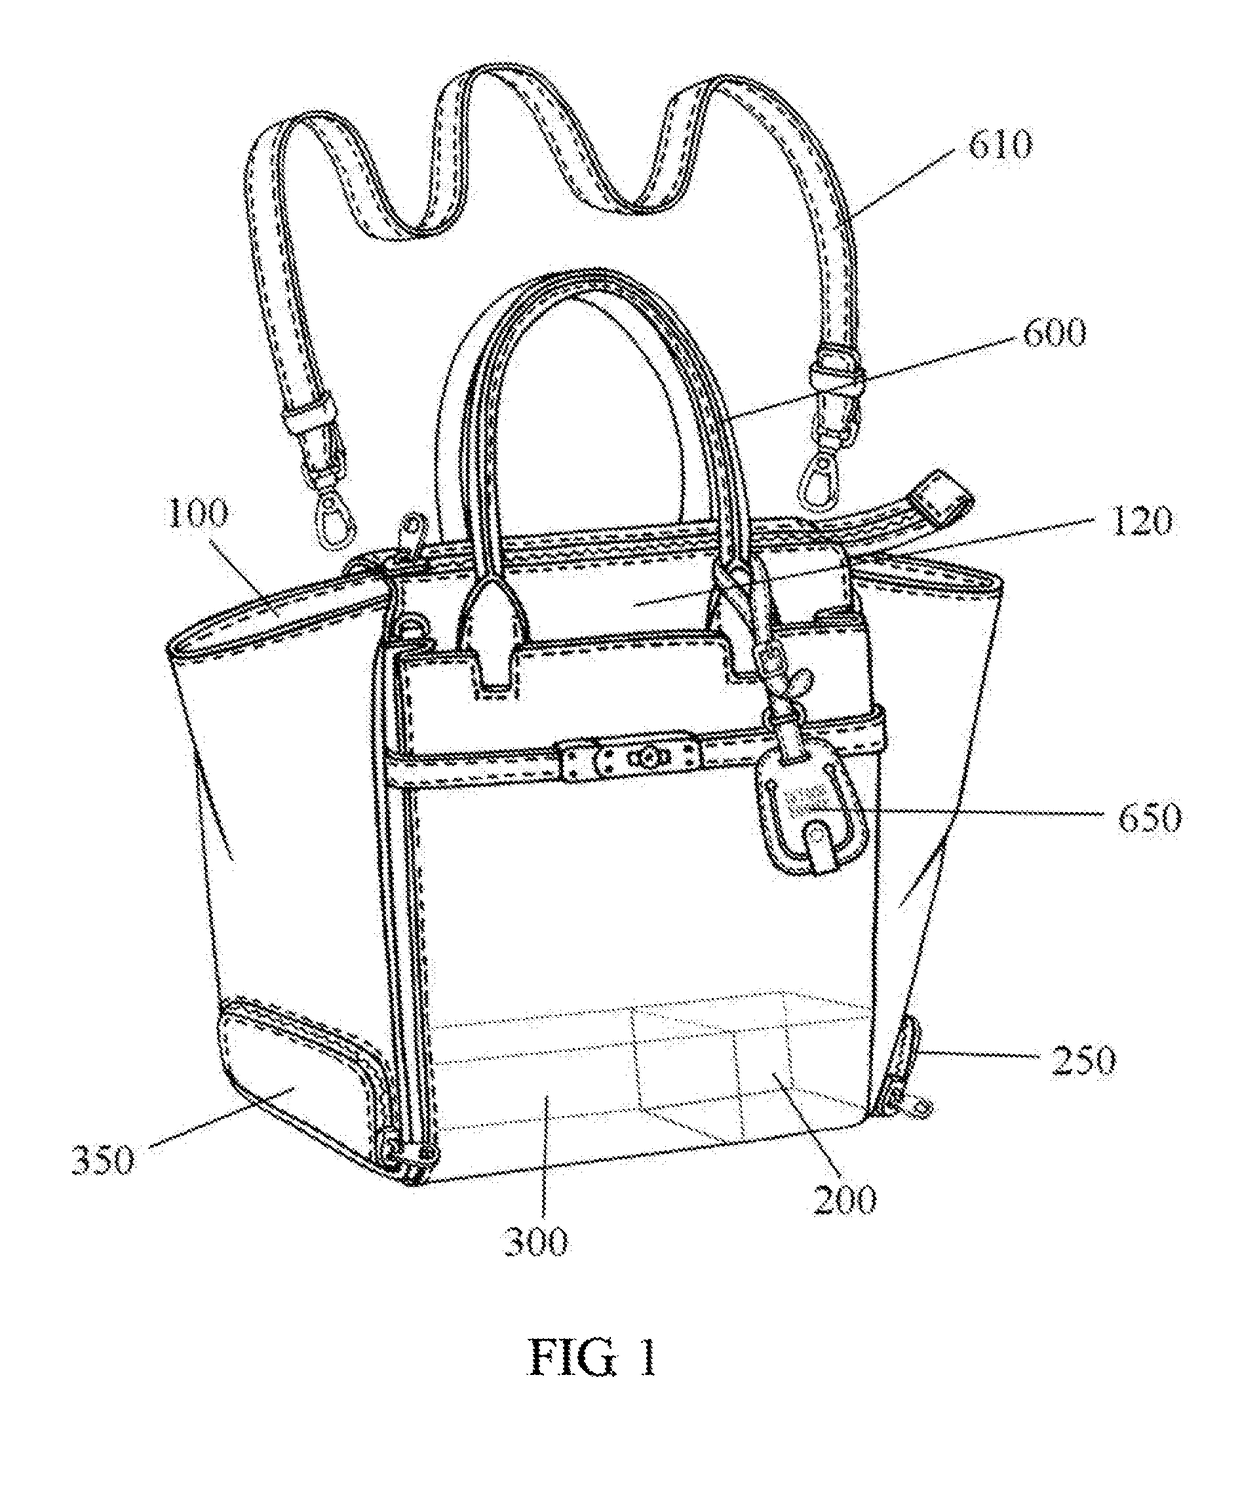 Carry-all bag with fixed insulated and non-insulated compartments